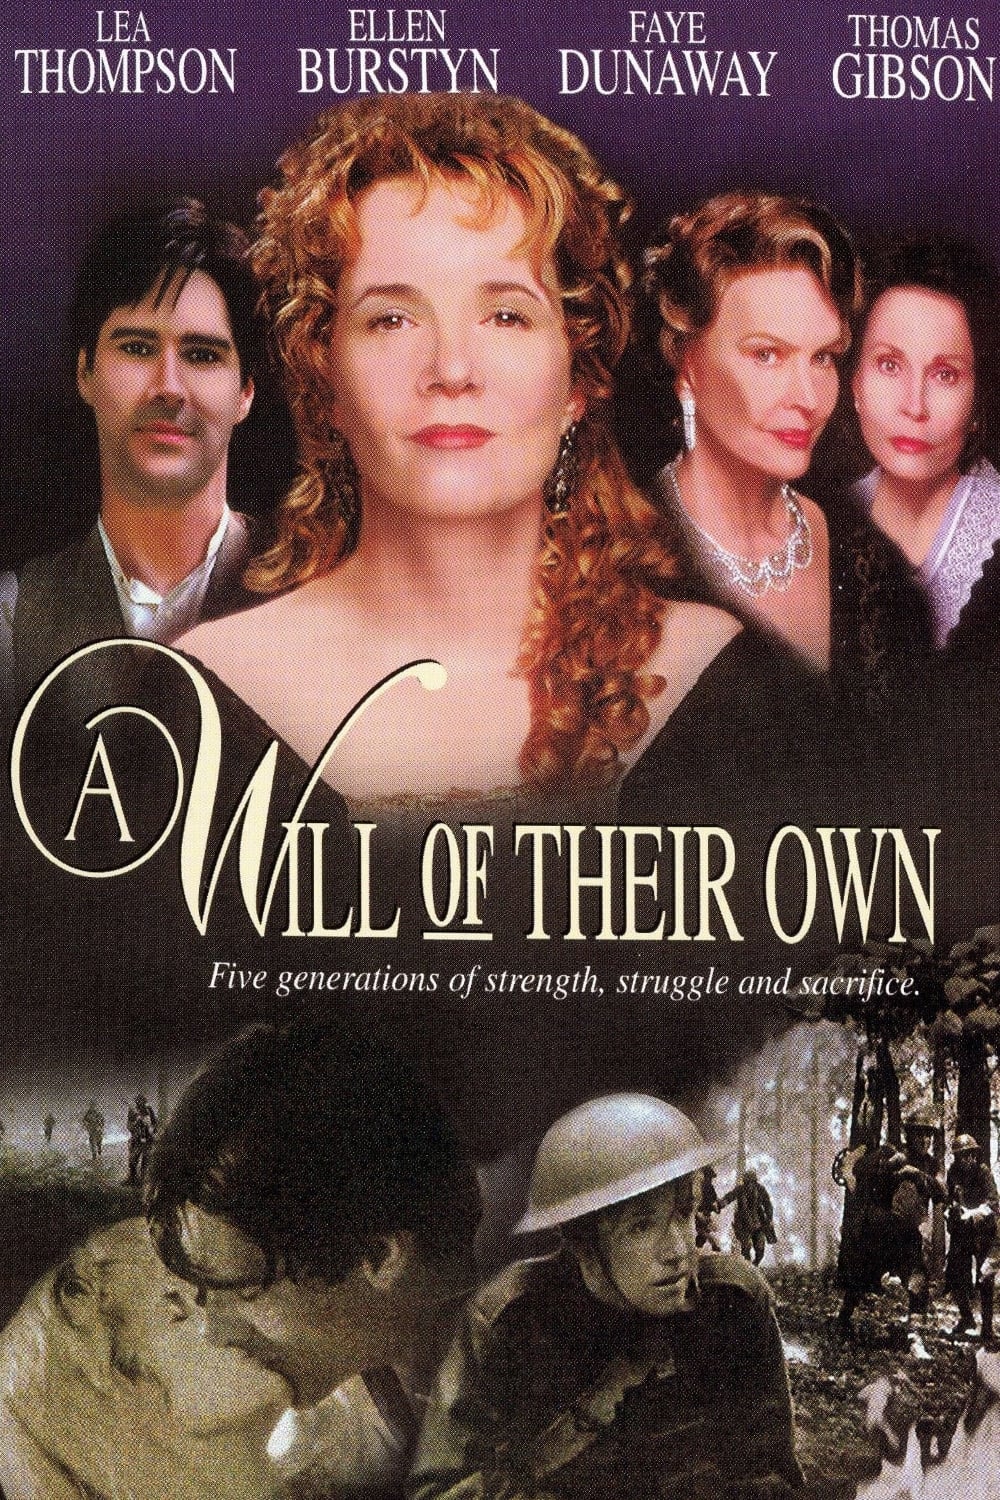 A Will of their Own (1998)